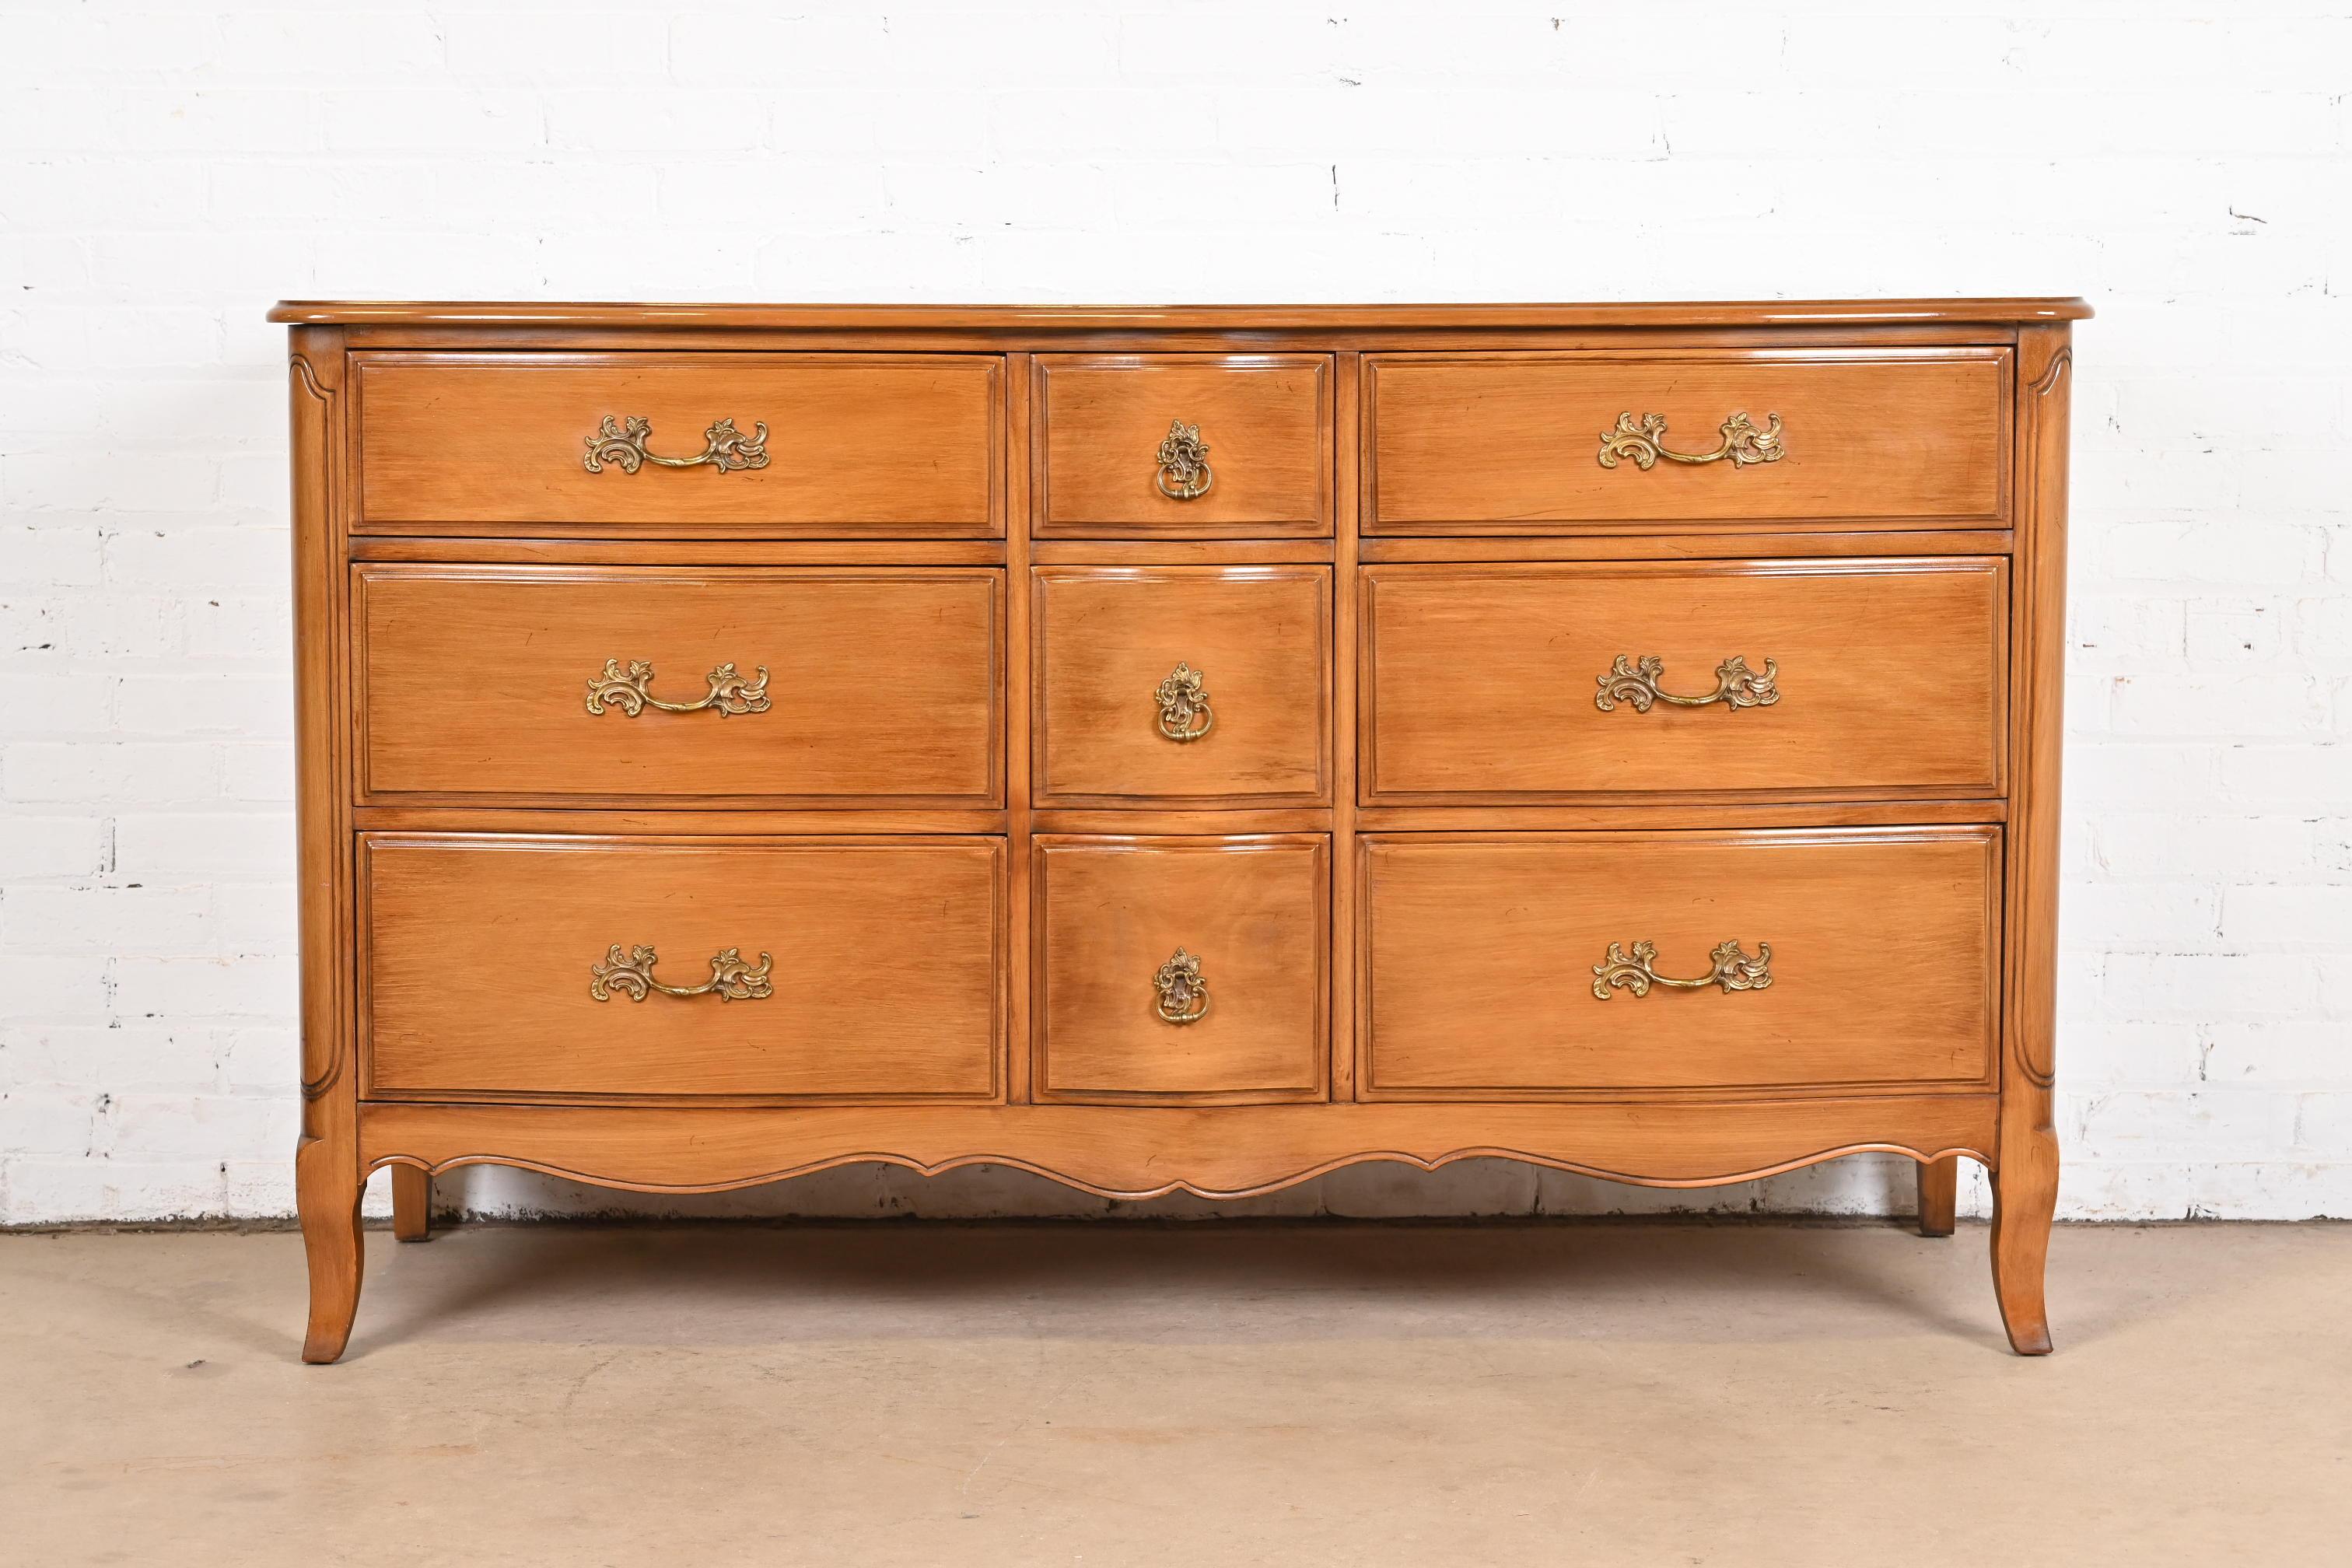 1950's french provincial bedroom furniture